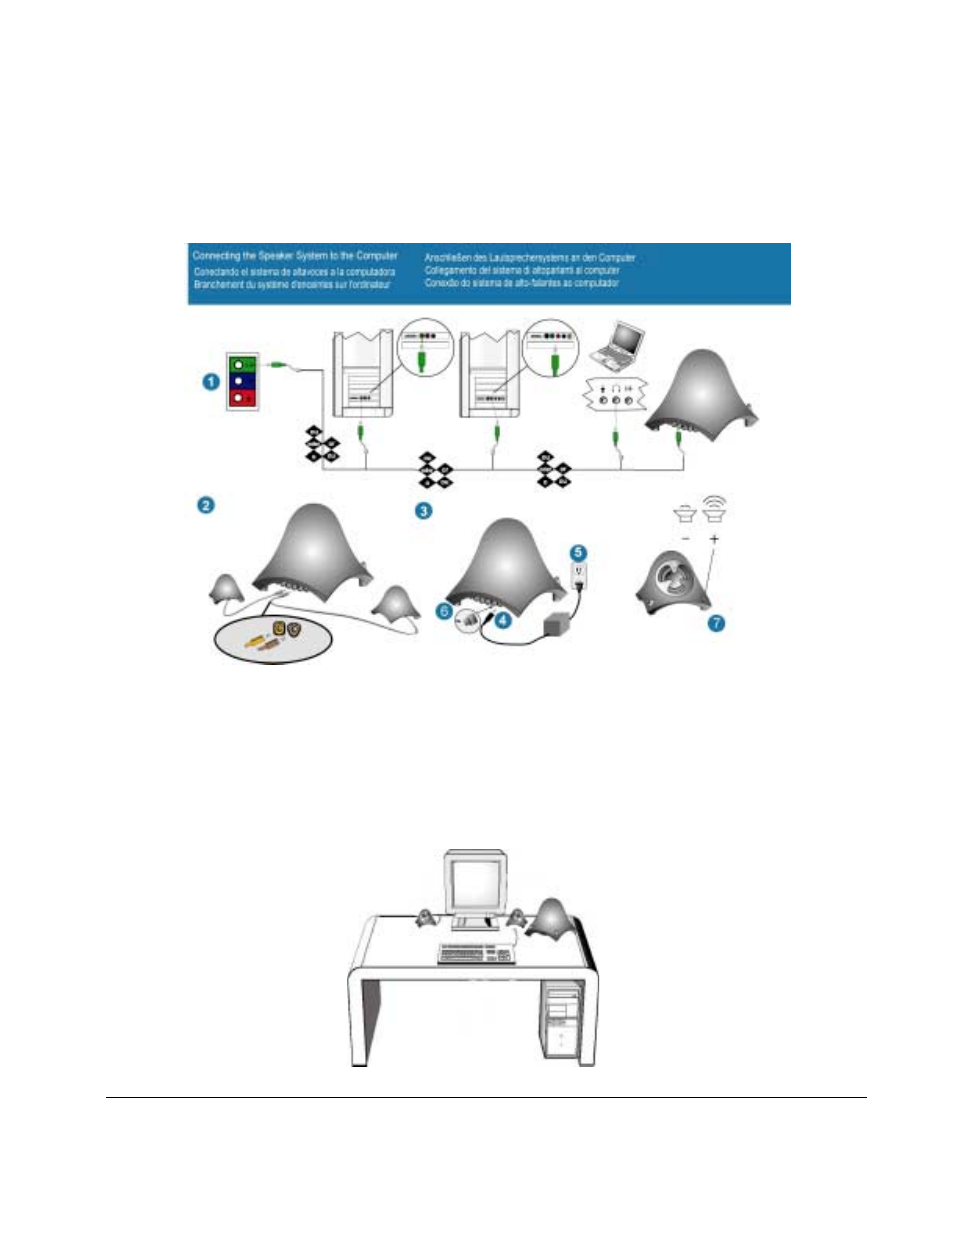 Placement of speakers | JBL CREATURE SELF POWERED SATELLITE SPEAKERS AND  SUBWOOFER User Manual | Page 3 / 6